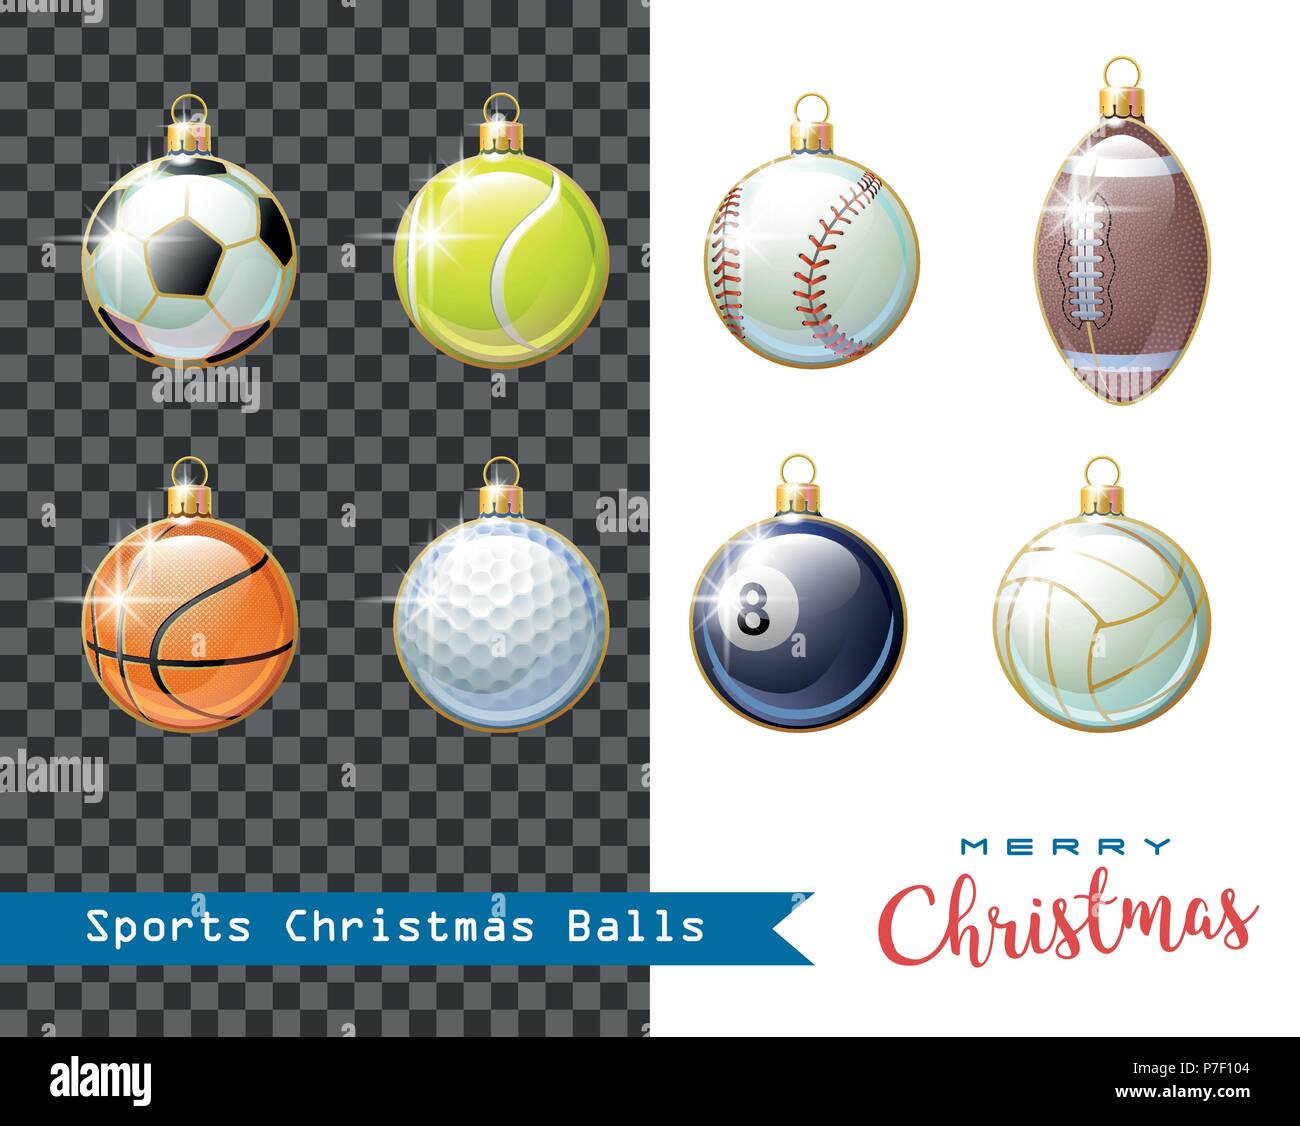 Merry Christmas. Collection of different Sports Christmas balls for your creative works. Vector illustration. Stock Vector